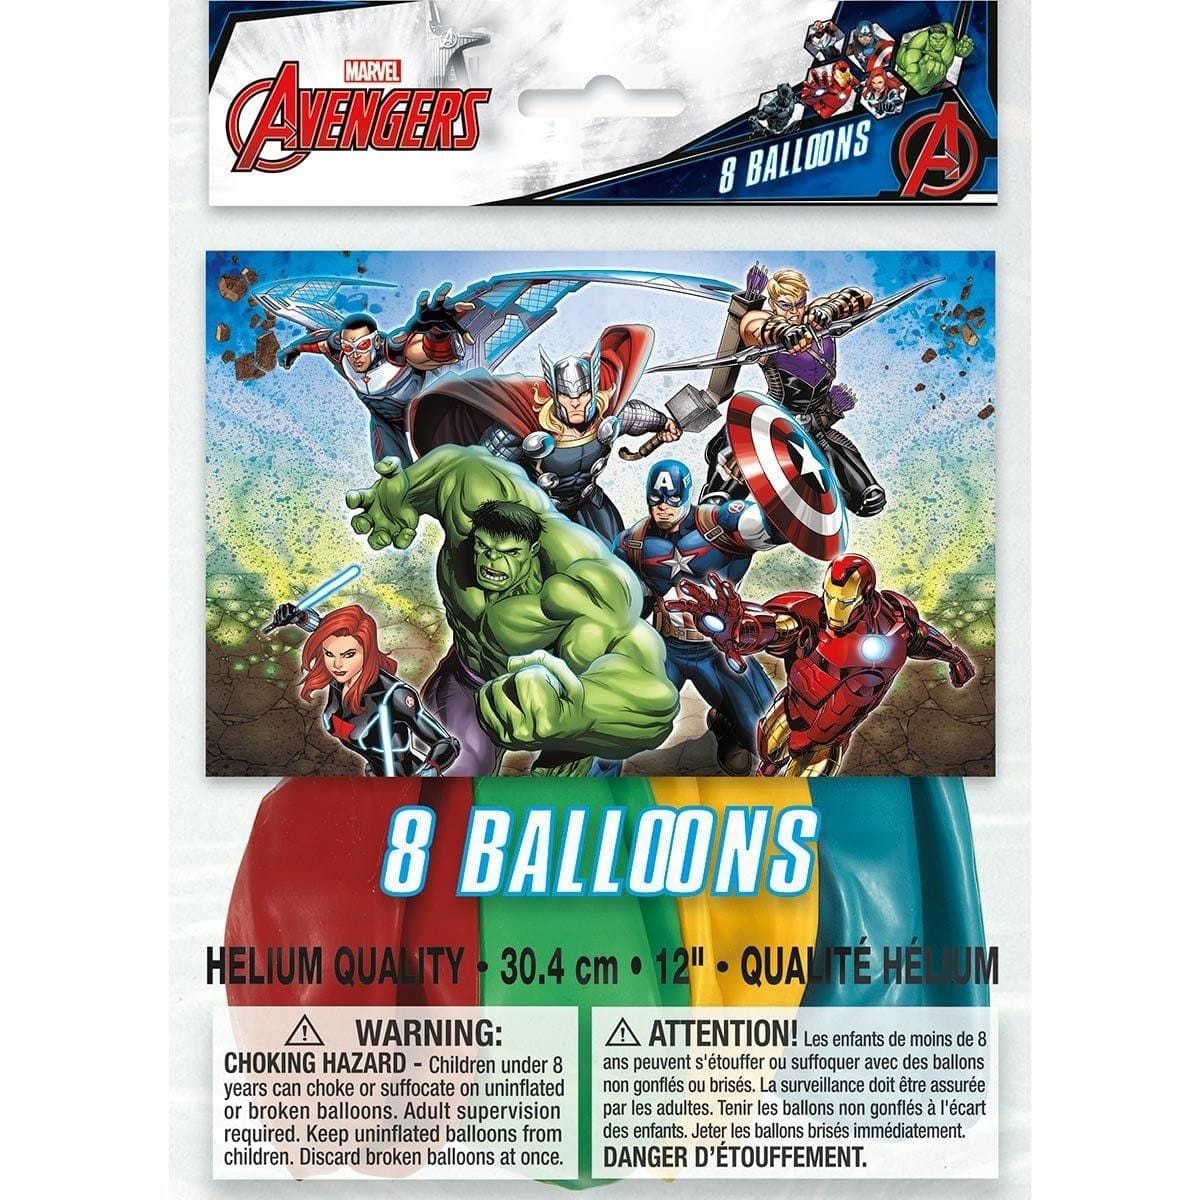 Buy Kids Birthday Avengers Assemble latex balloons 12 inches, 8 per package sold at Party Expert